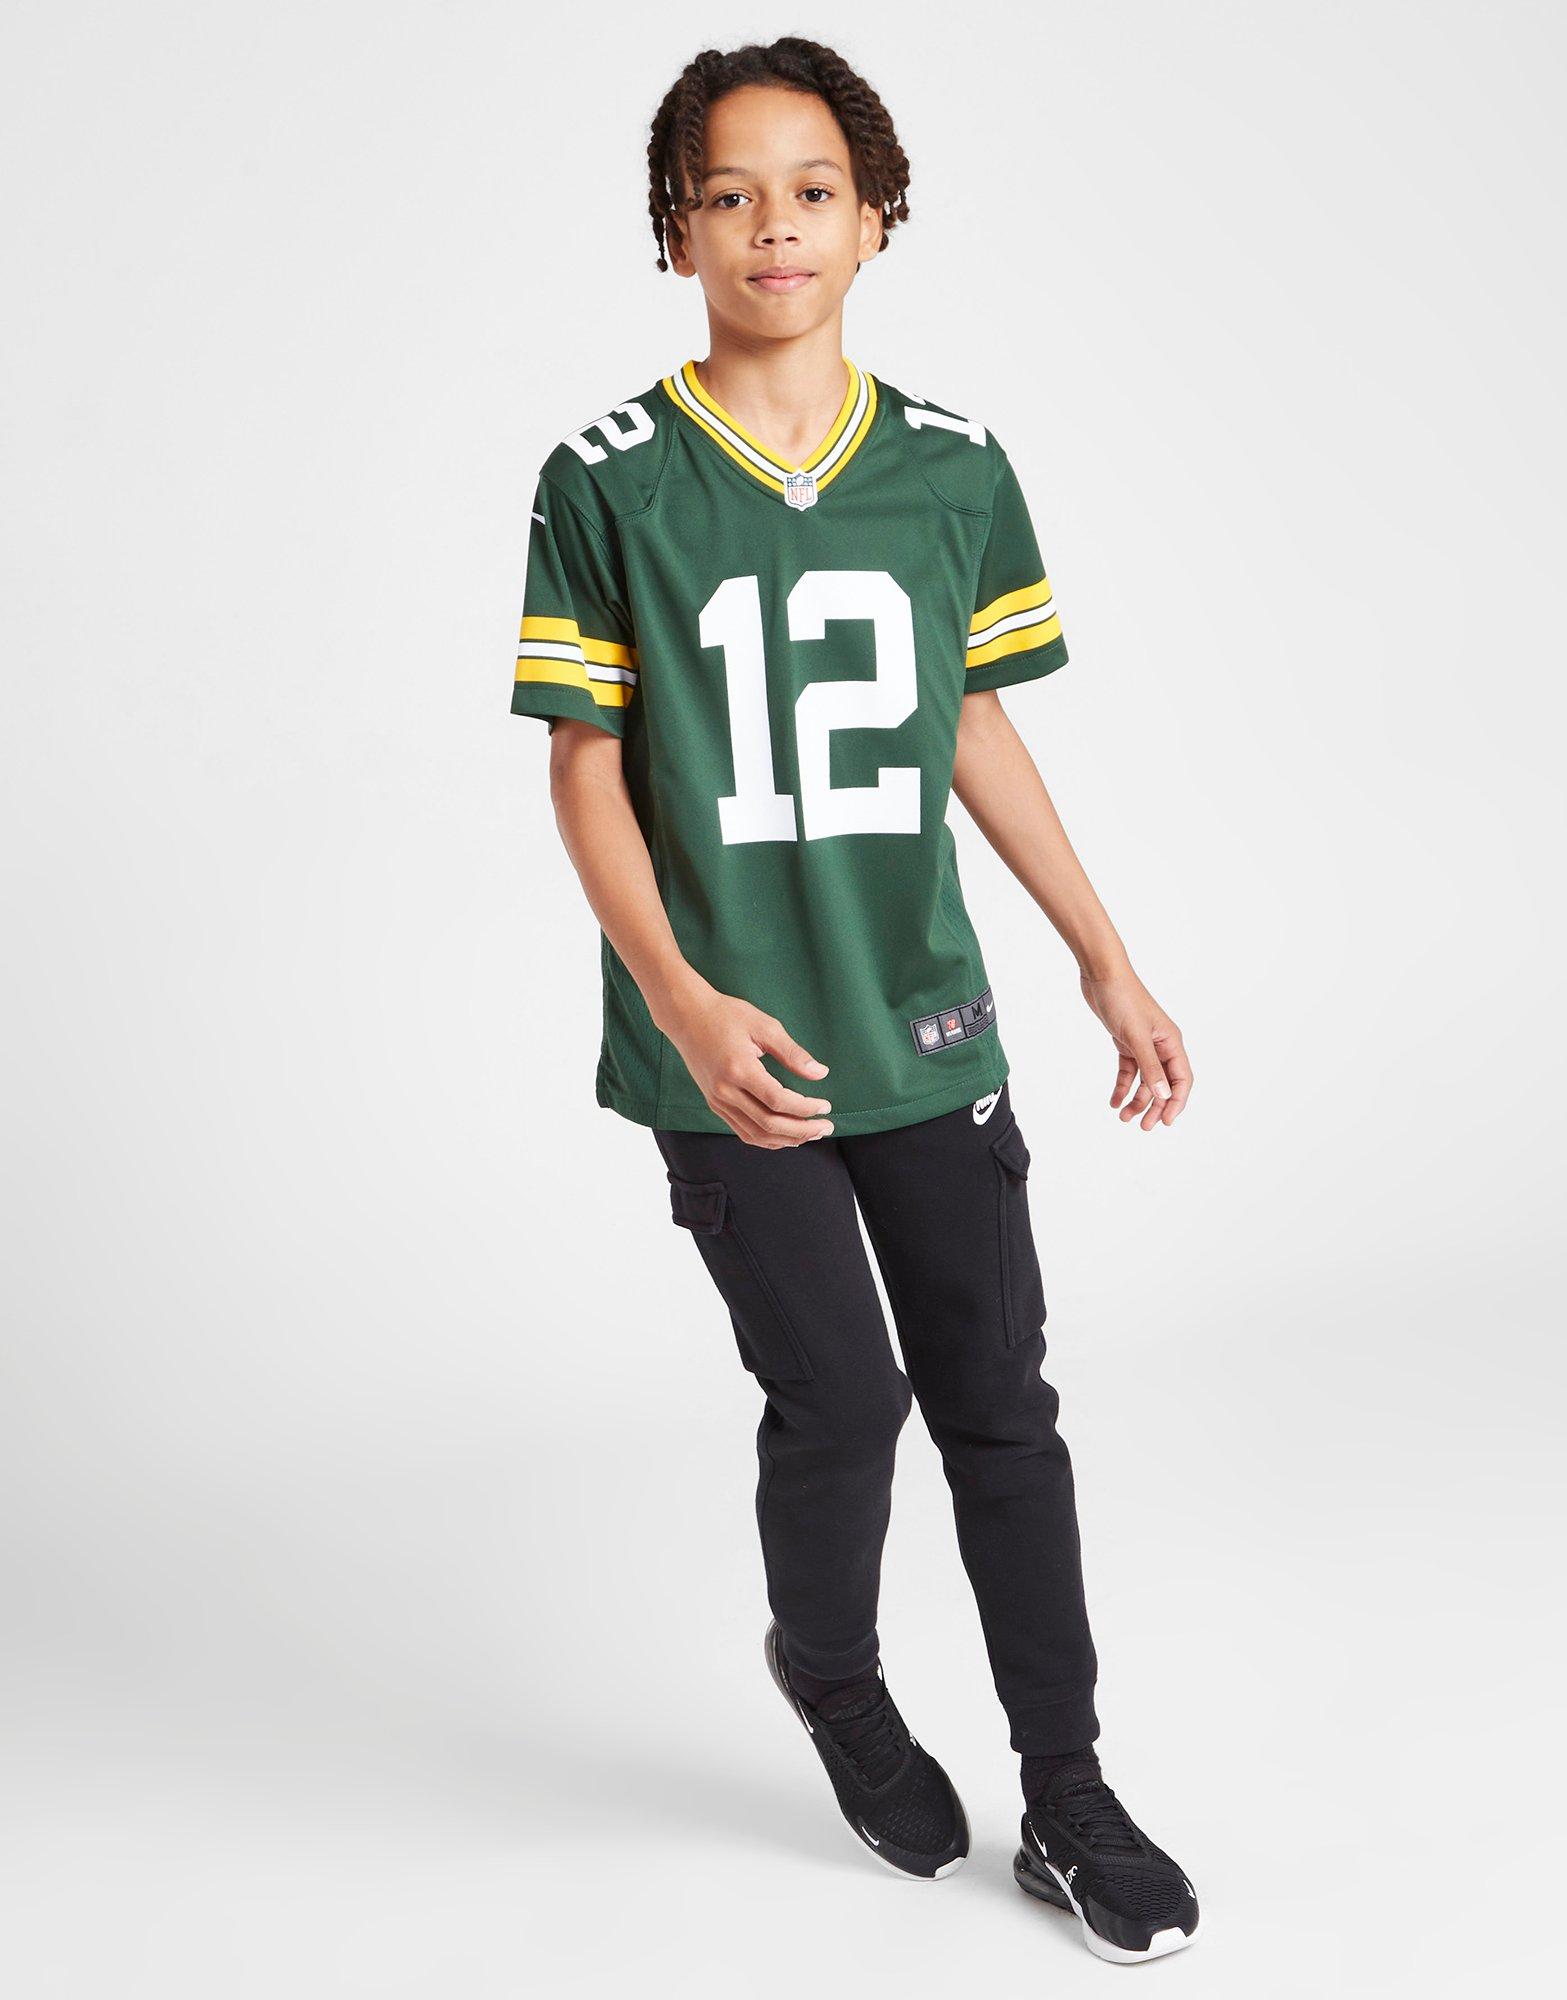 football outfit for boys 9-10 green bay packers jersey